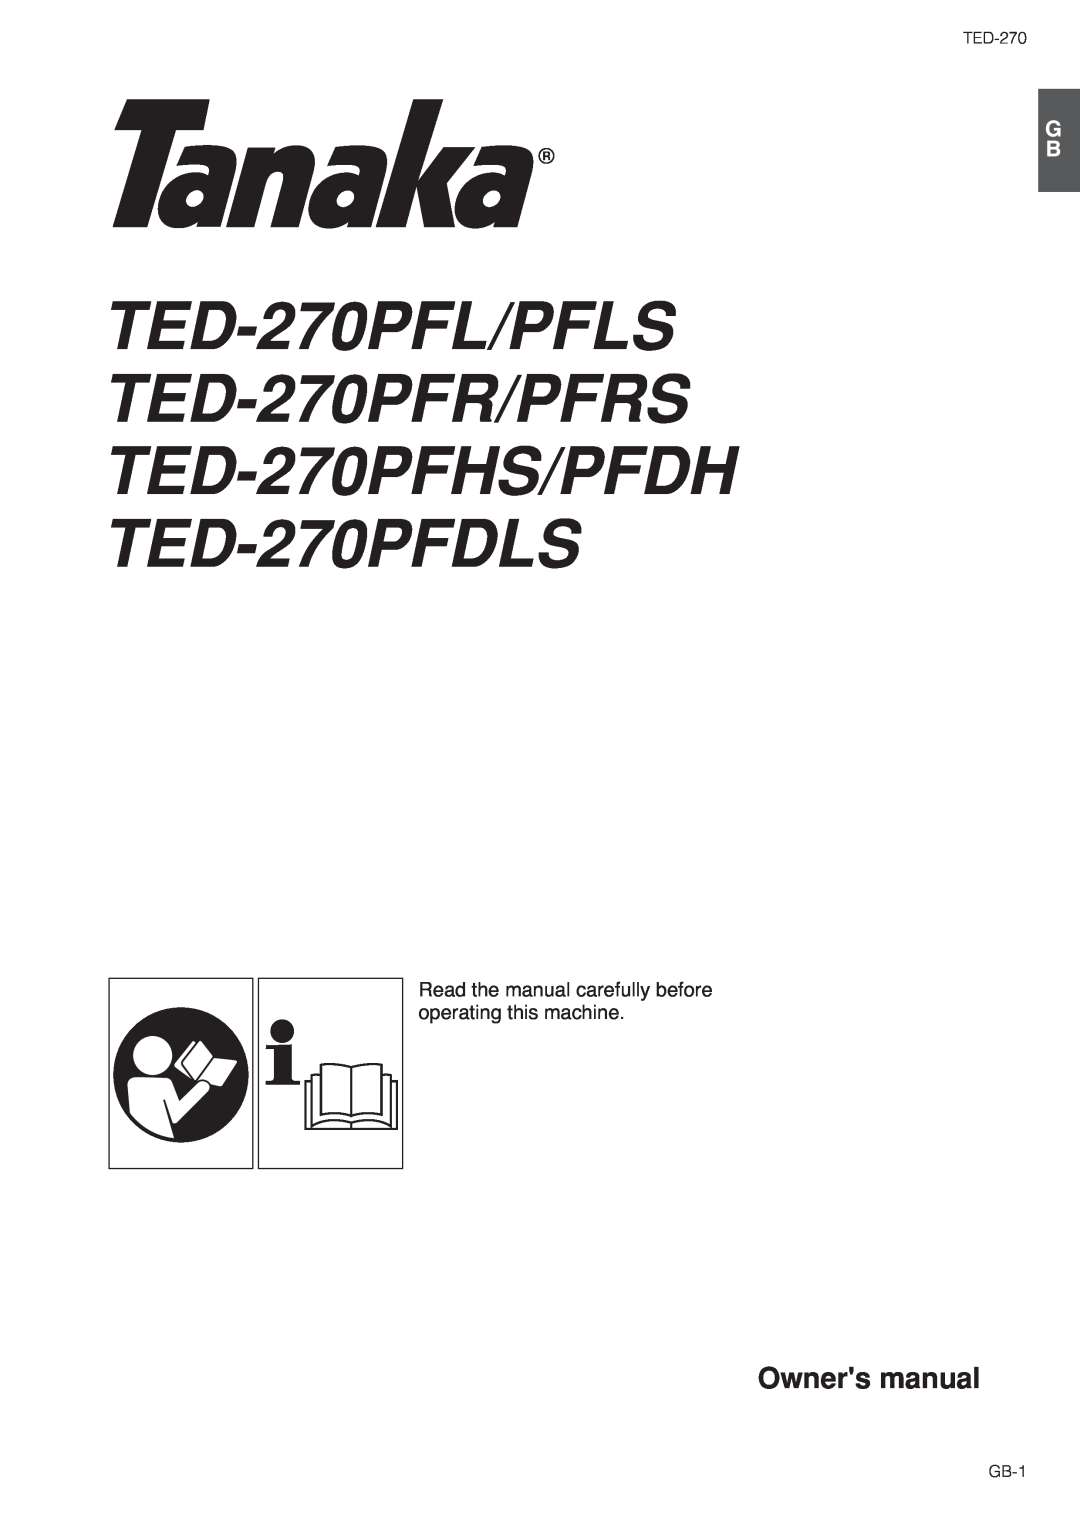 Tanaka TED-270PFL/PFLS, TED-270PFDLS Owners manual, Read the manual carefully before operating this machine, GB-1 